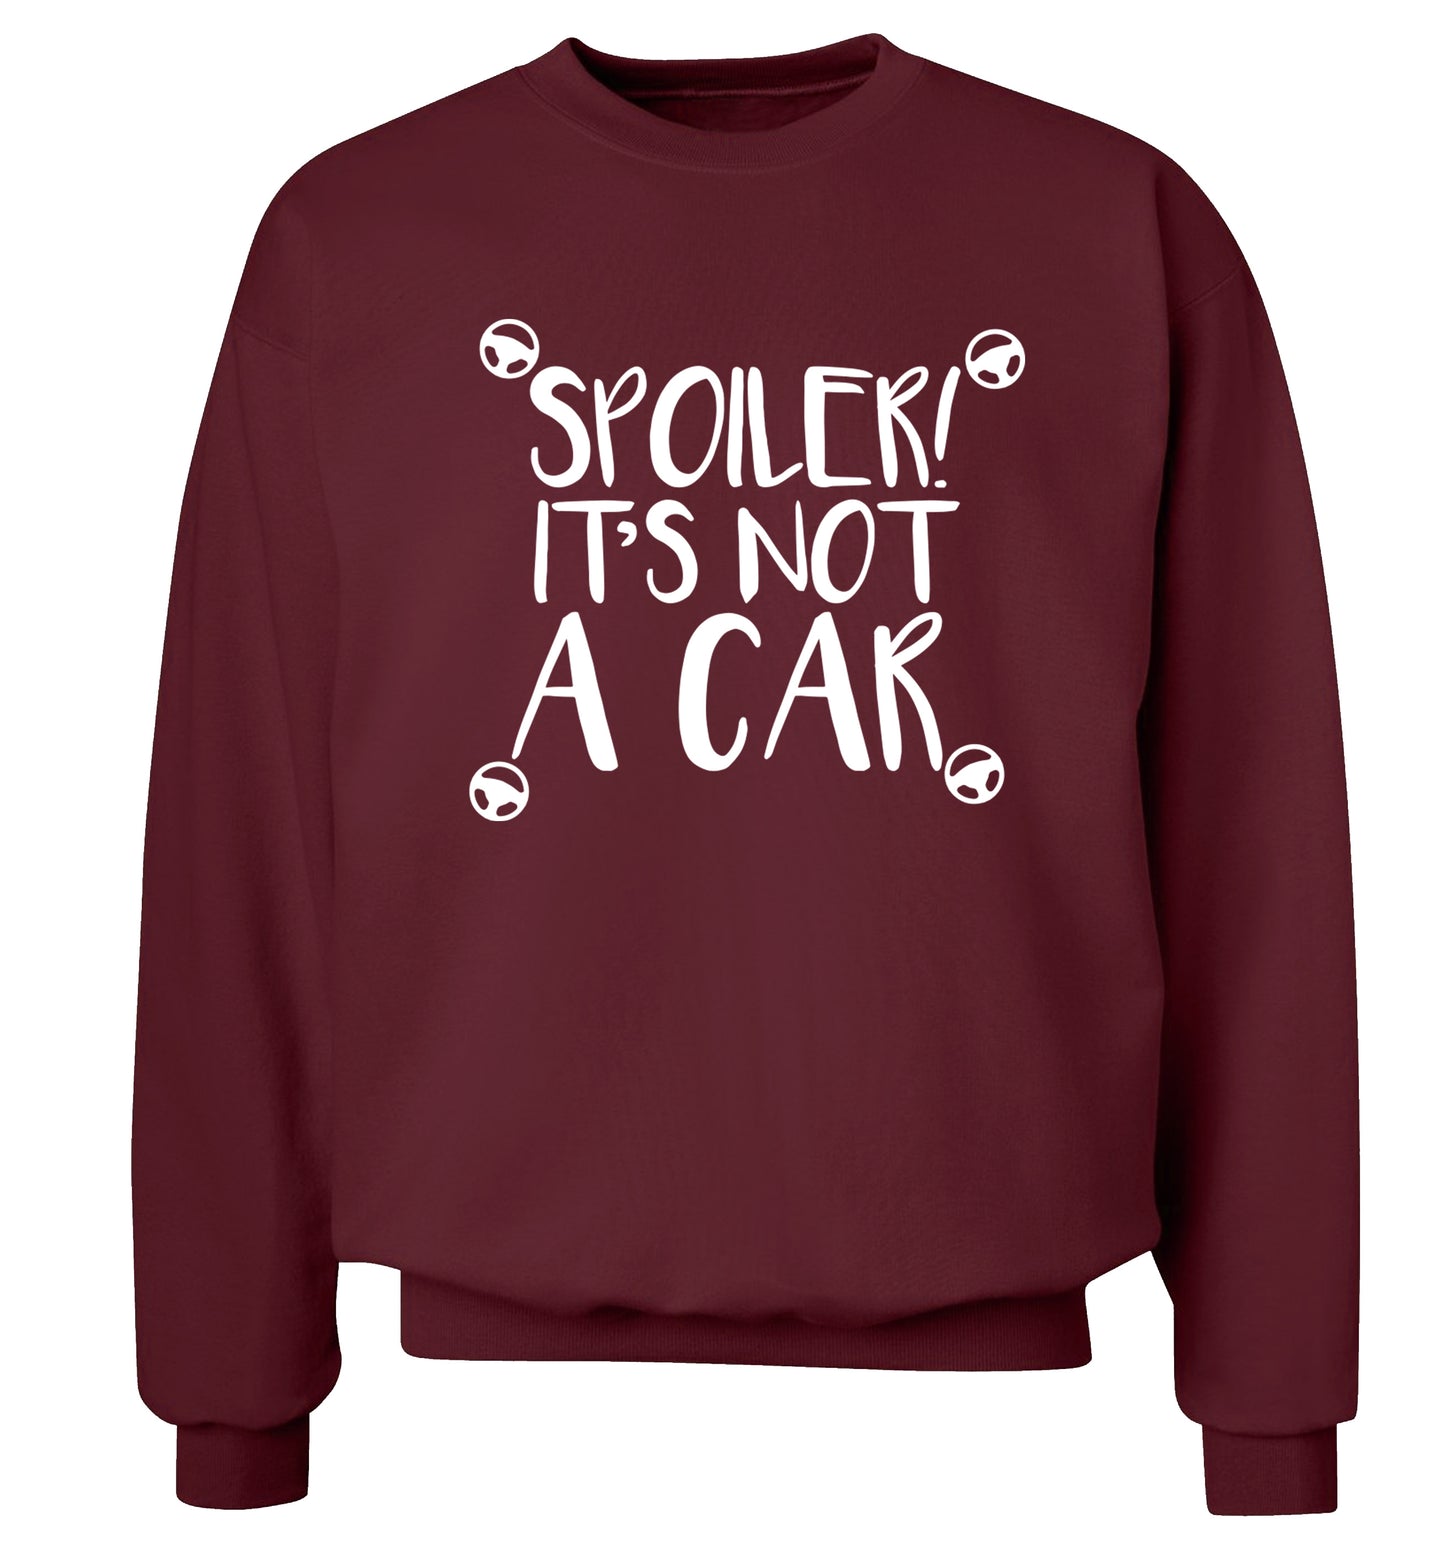 Spoiler it's not a car Adult's unisex maroon Sweater 2XL